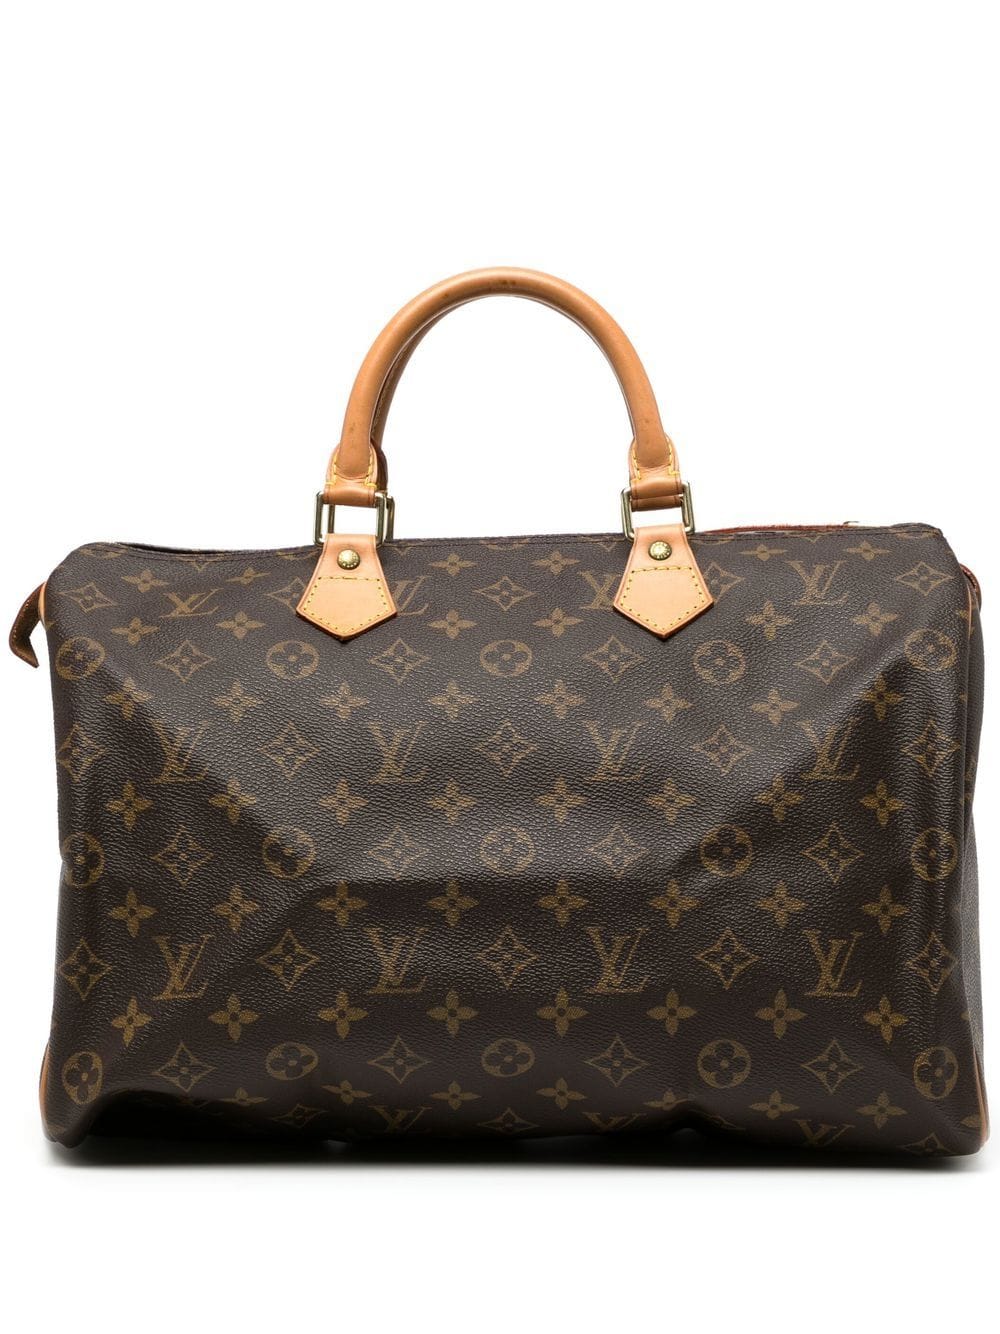 Louis Vuitton Handbags for sale in Rapitsi Limpopo South Africa   Facebook Marketplace  Facebook